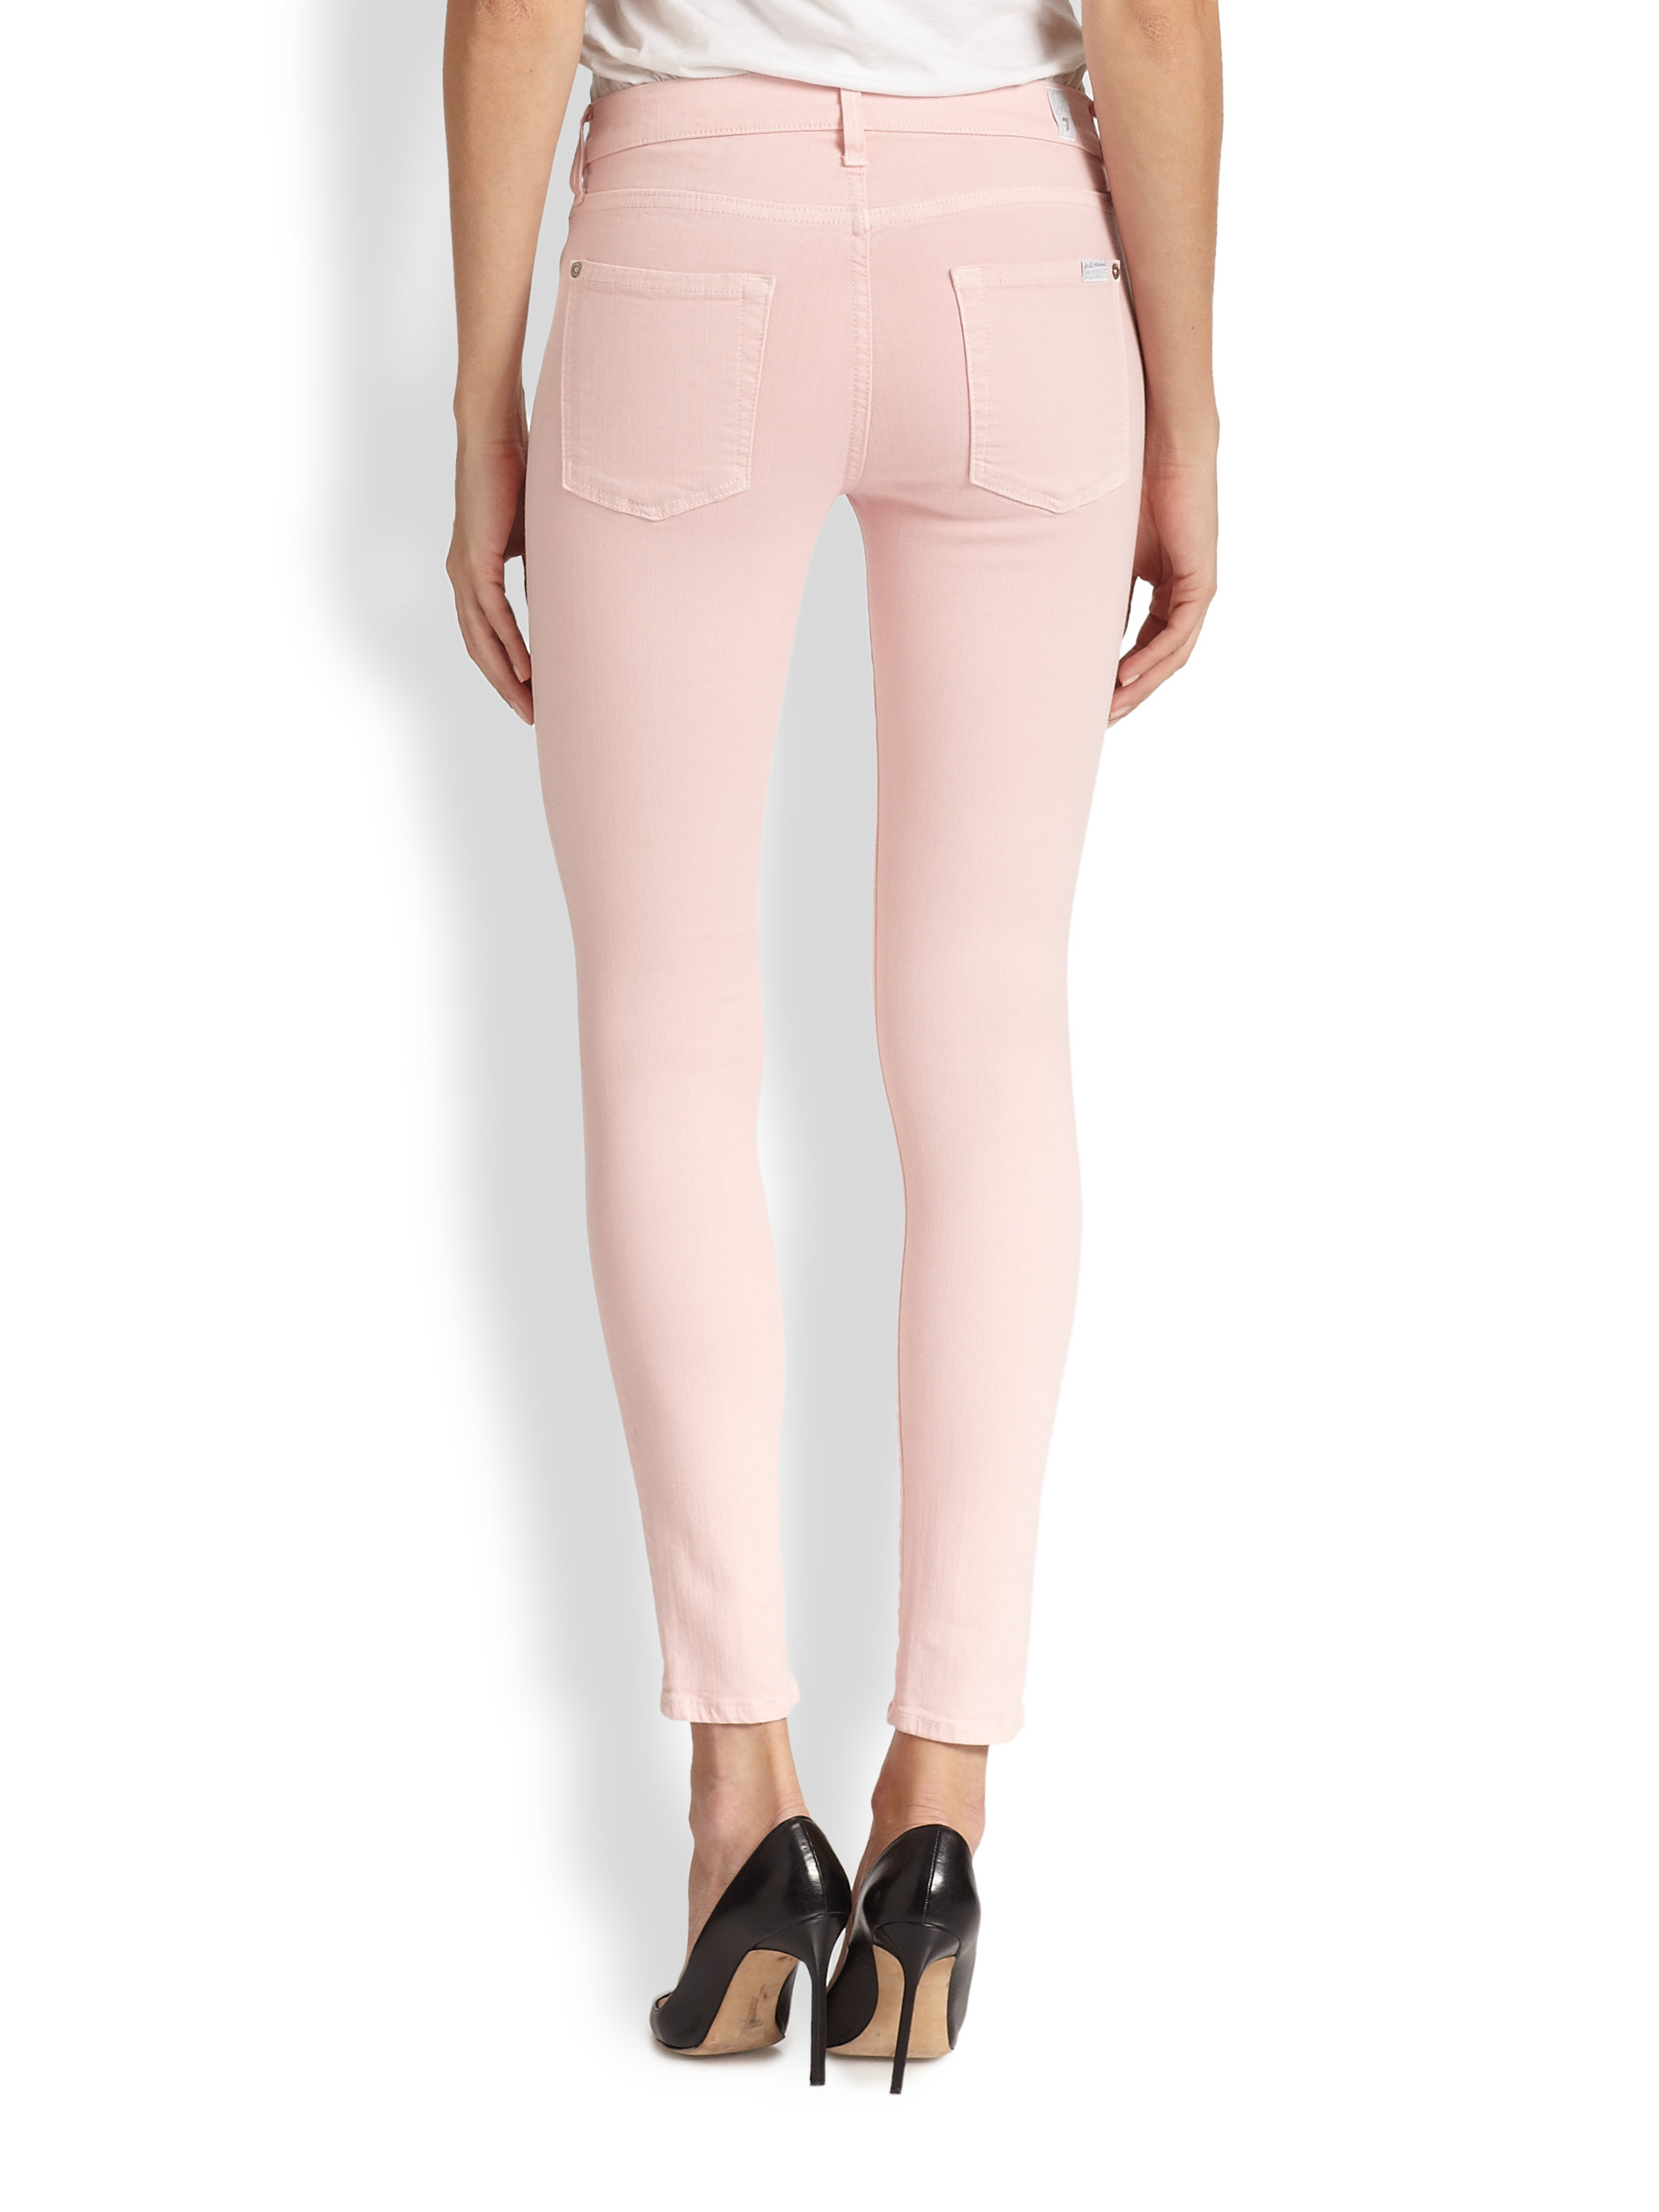 7 For All Mankind The Ankle Skinny Jeans in Pink | Lyst